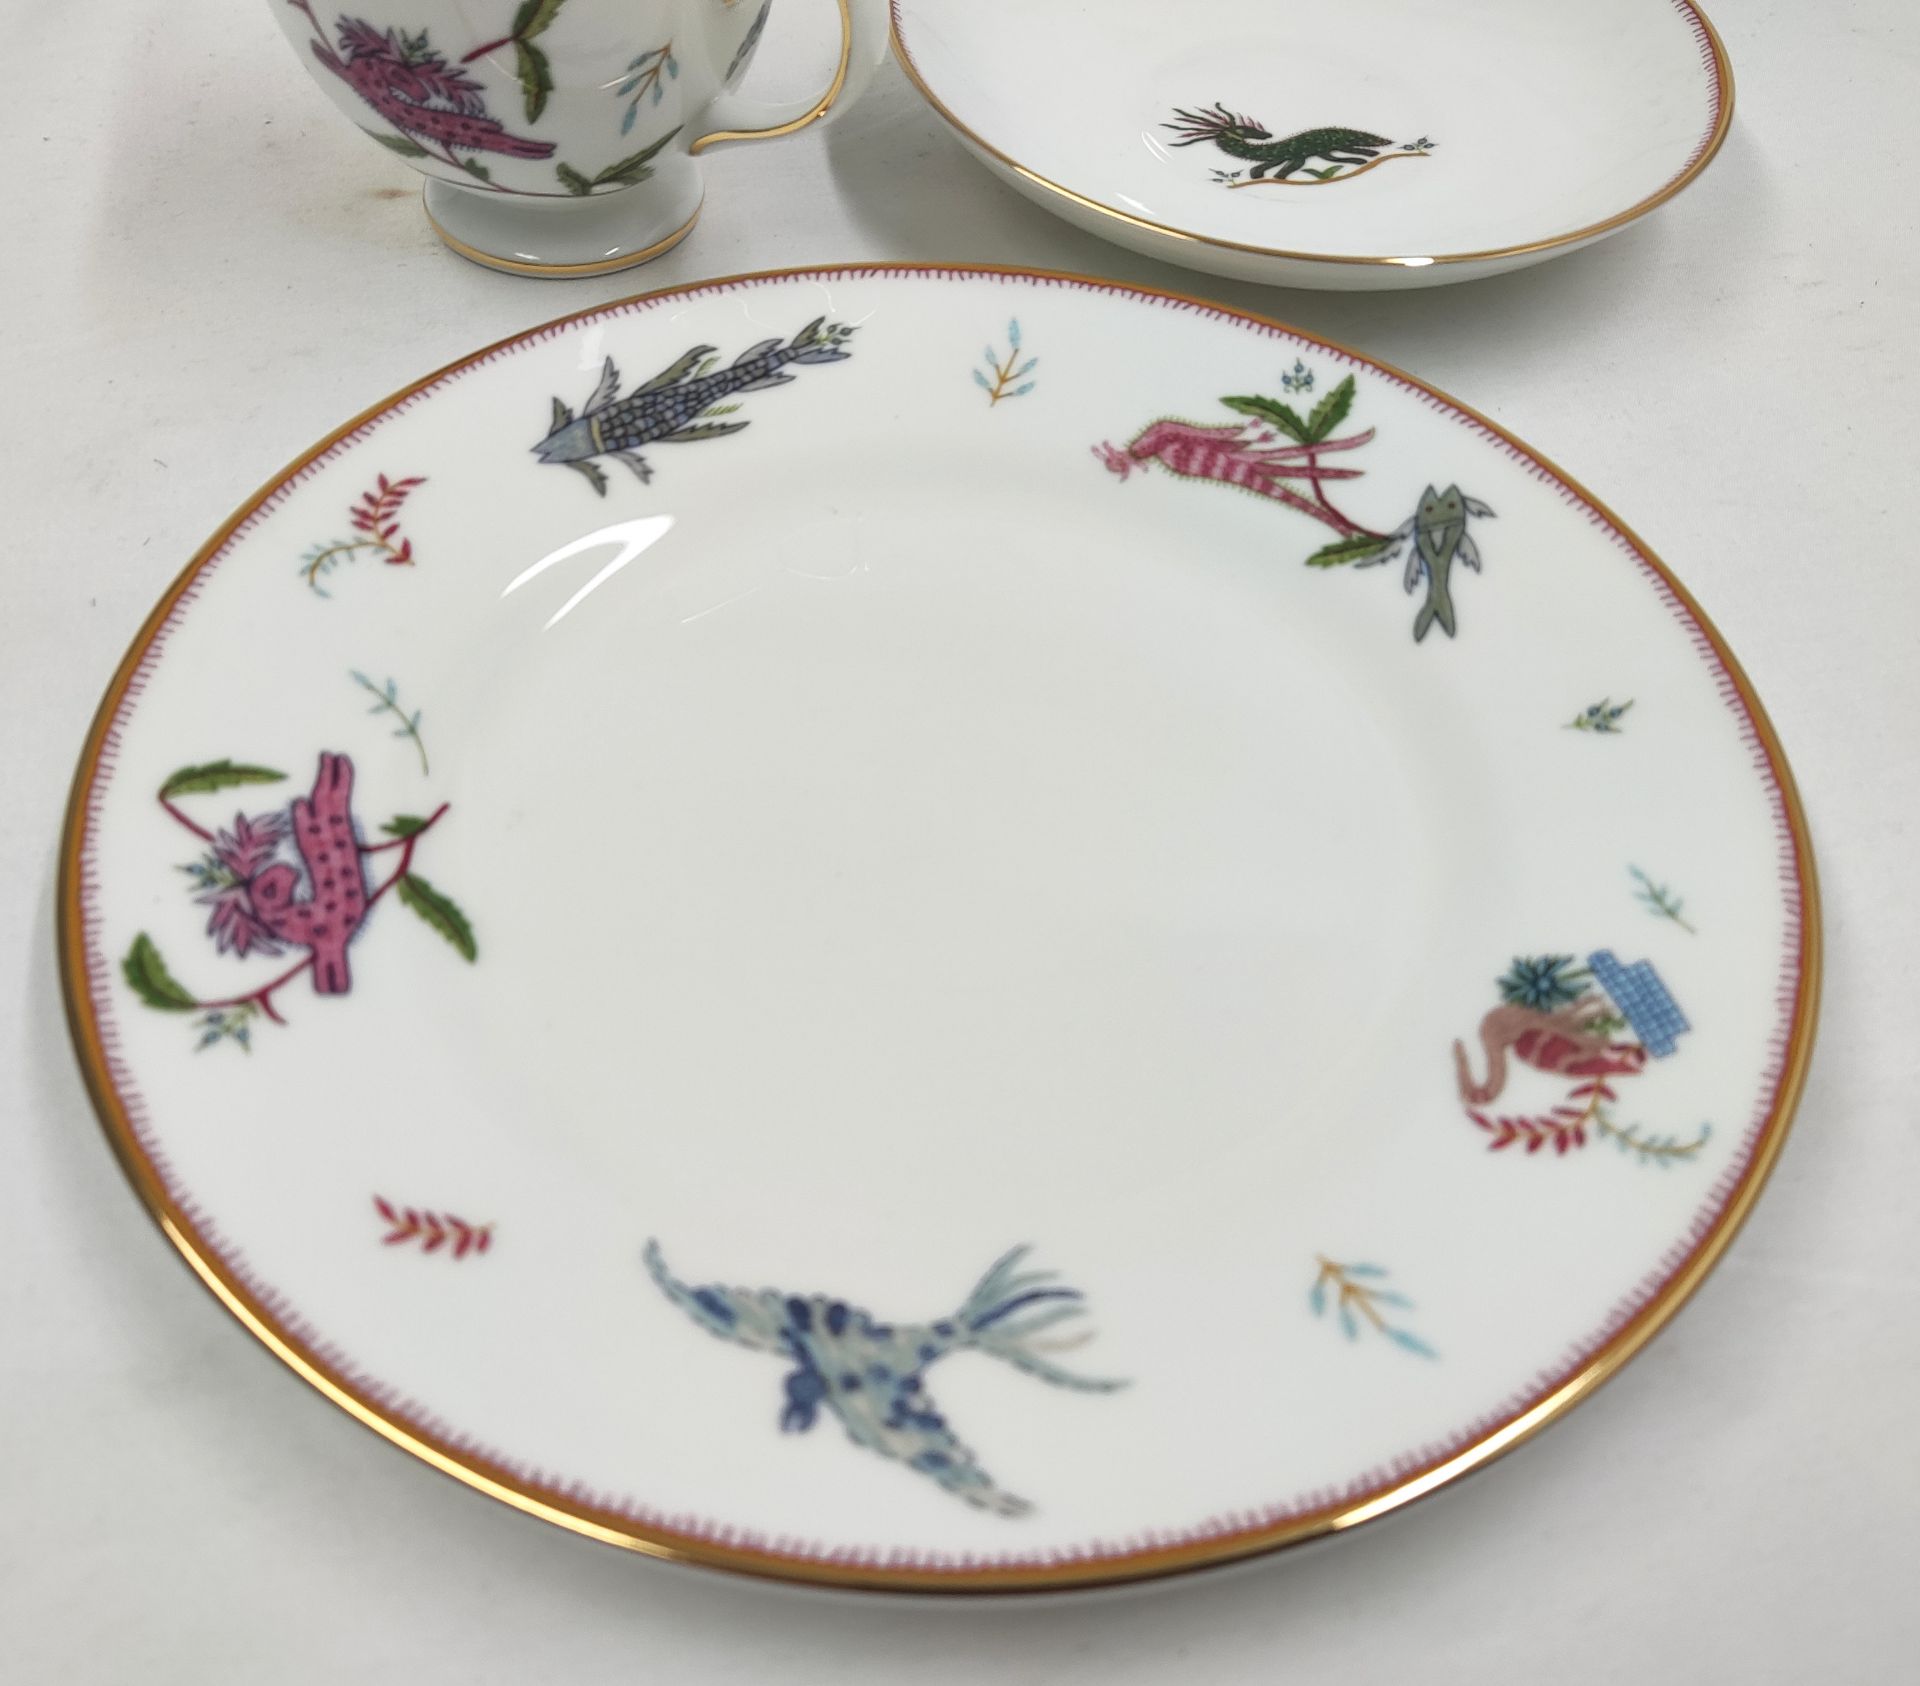 1 x WEDGWOOD Mythical Creatures Fine Bone China Teacup/Saucer/Plate Set - New/Boxed - RRP £140.00 - Image 5 of 20